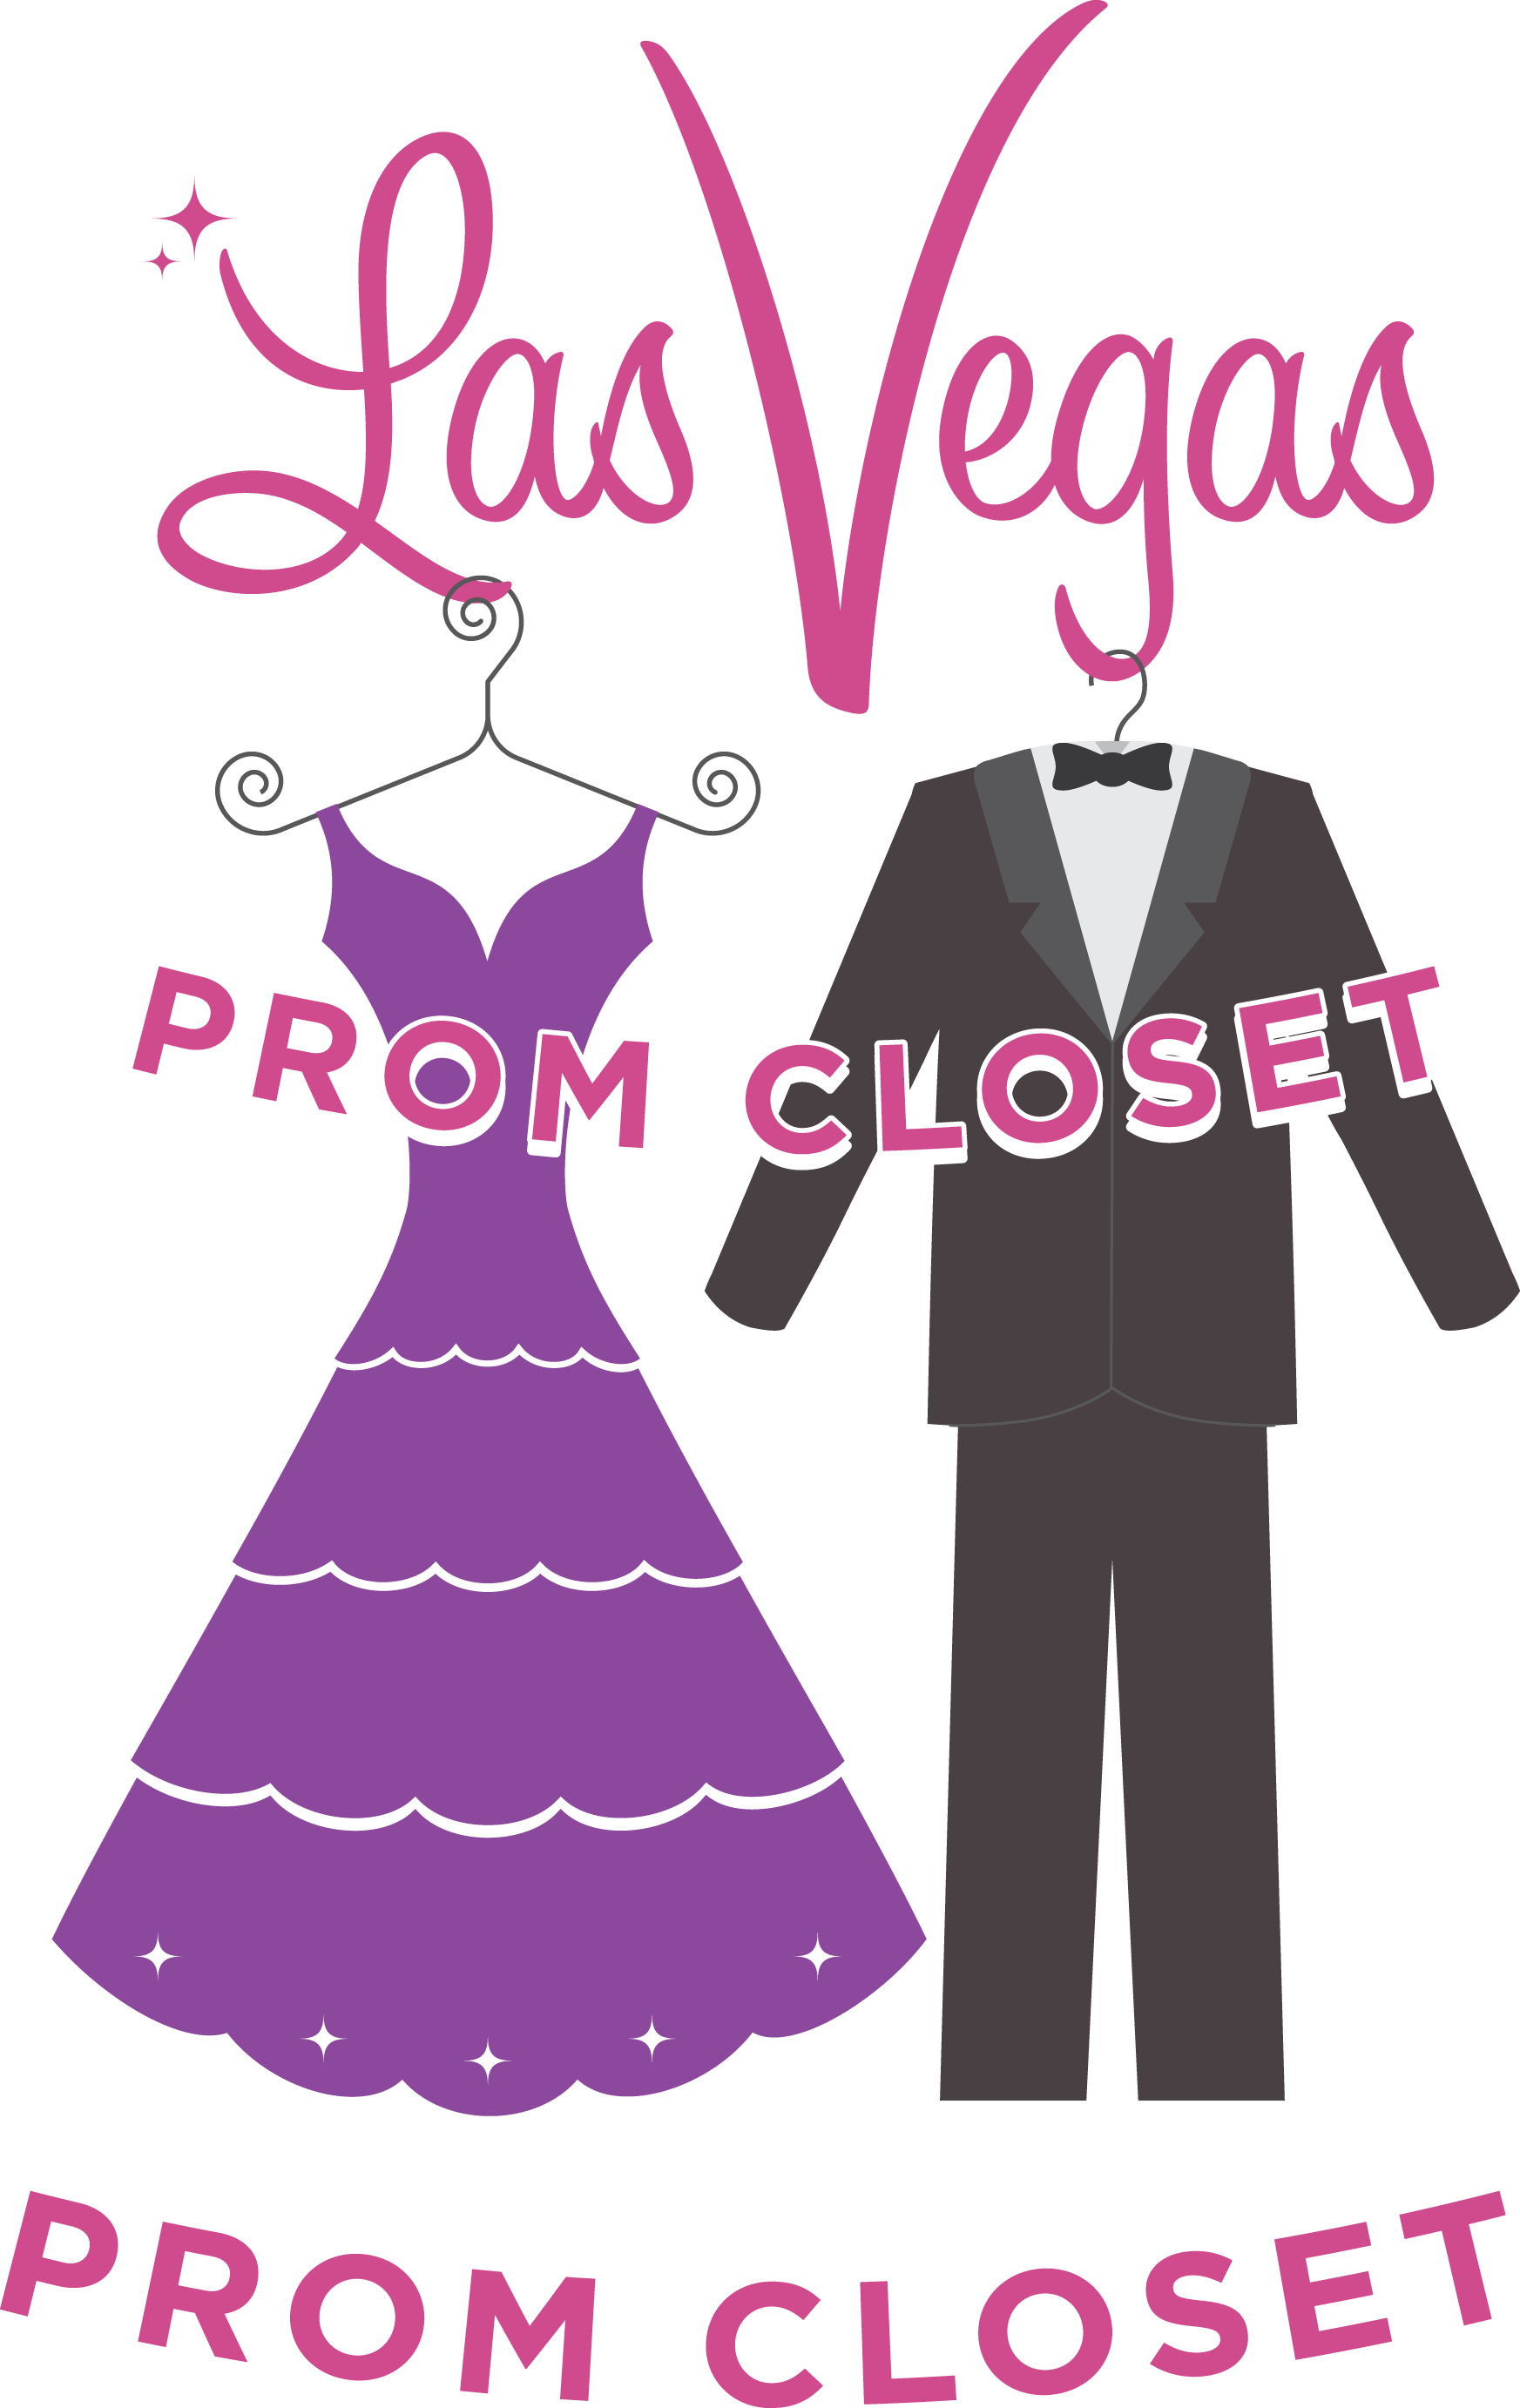 Project 150 is partnering with Zappos.com to make prom dreams come true for homeless, displaced and disadvantaged students in Southern Nevada with the annual Las Vegas Prom Closet event on Saturday, March 17.